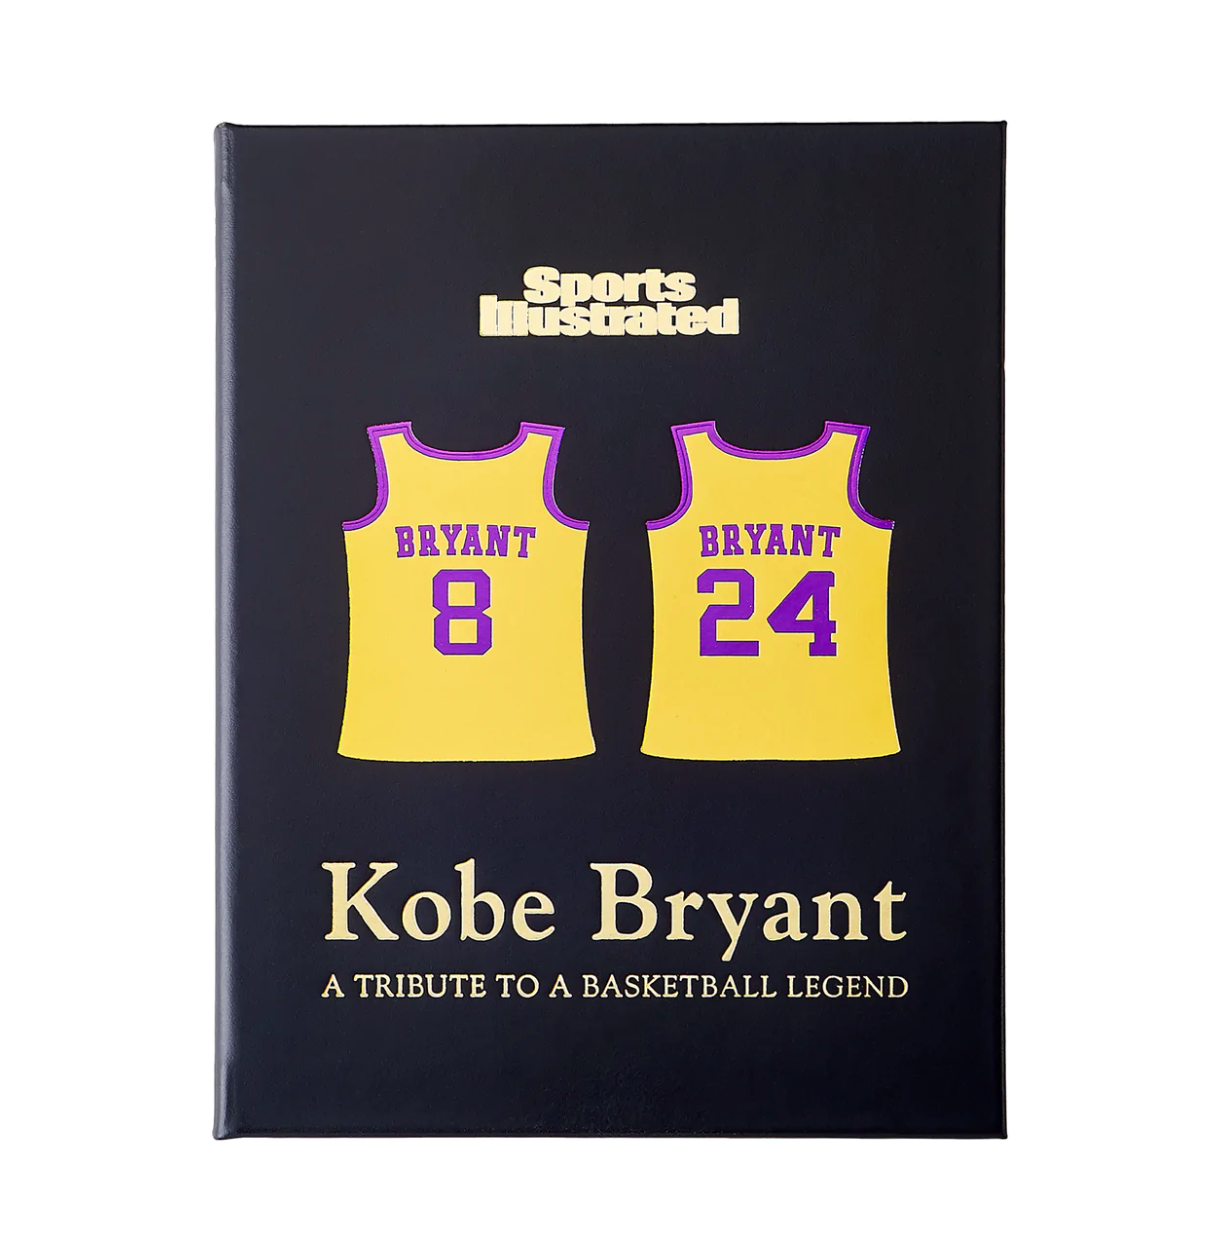 Kobe Bryant: A Tribute To a Basketball Legend – Leather Edition Book